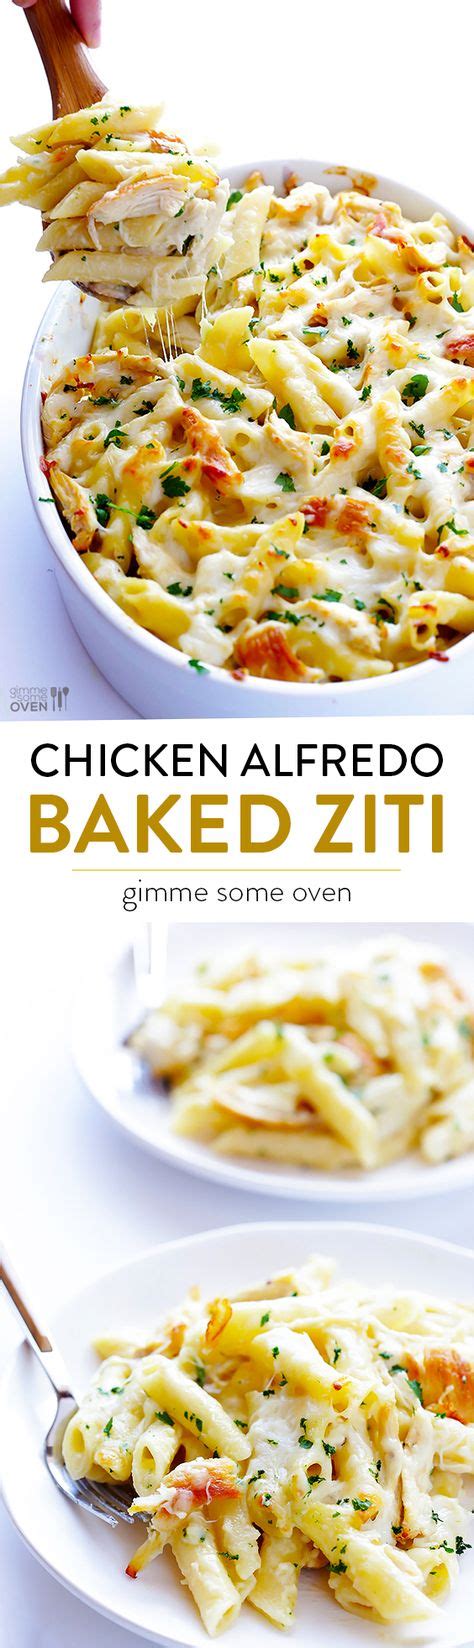 Chicken Alfredo Baked Ziti Simple To Make Made With A Lighter